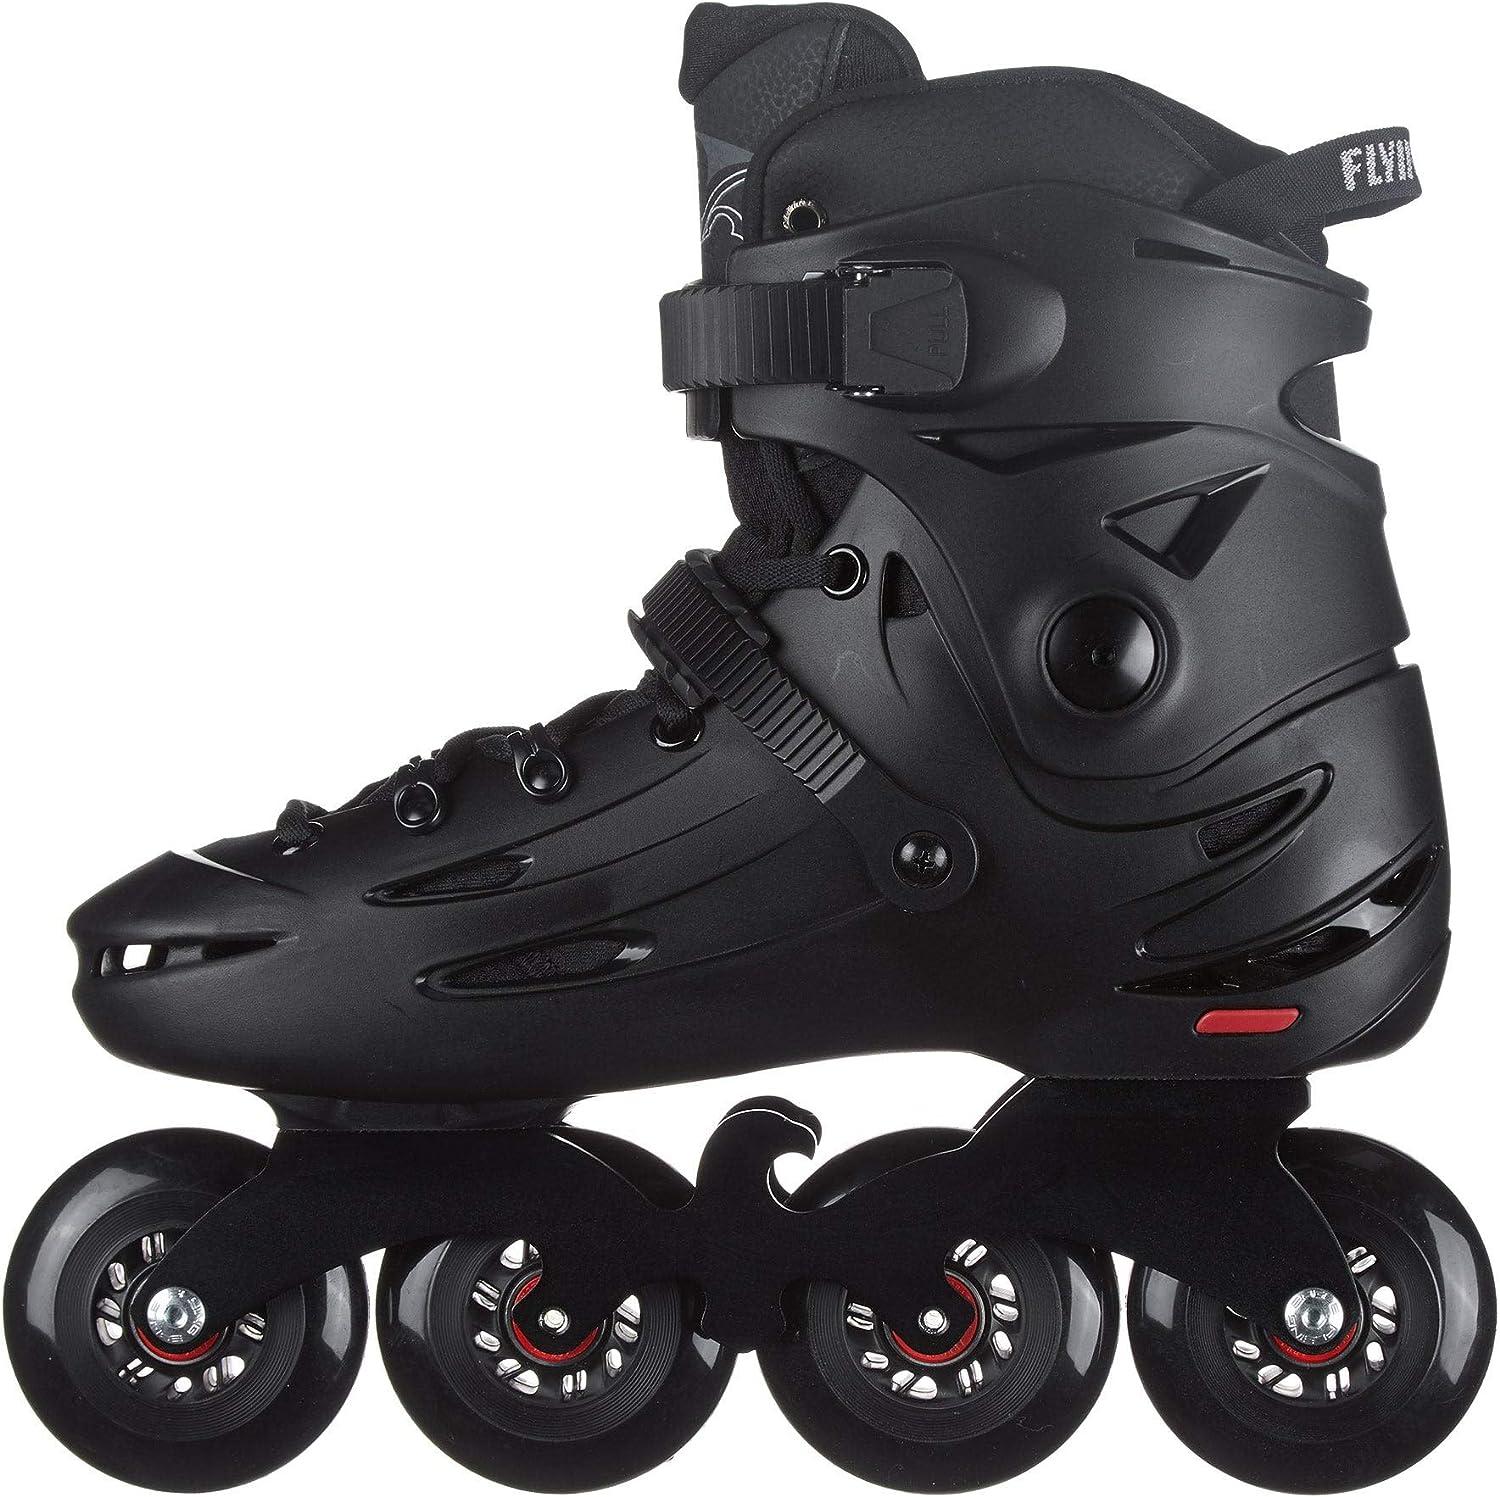 flying eagle inline skates - Buy flying eagle inline skates at Best Price  in Malaysia